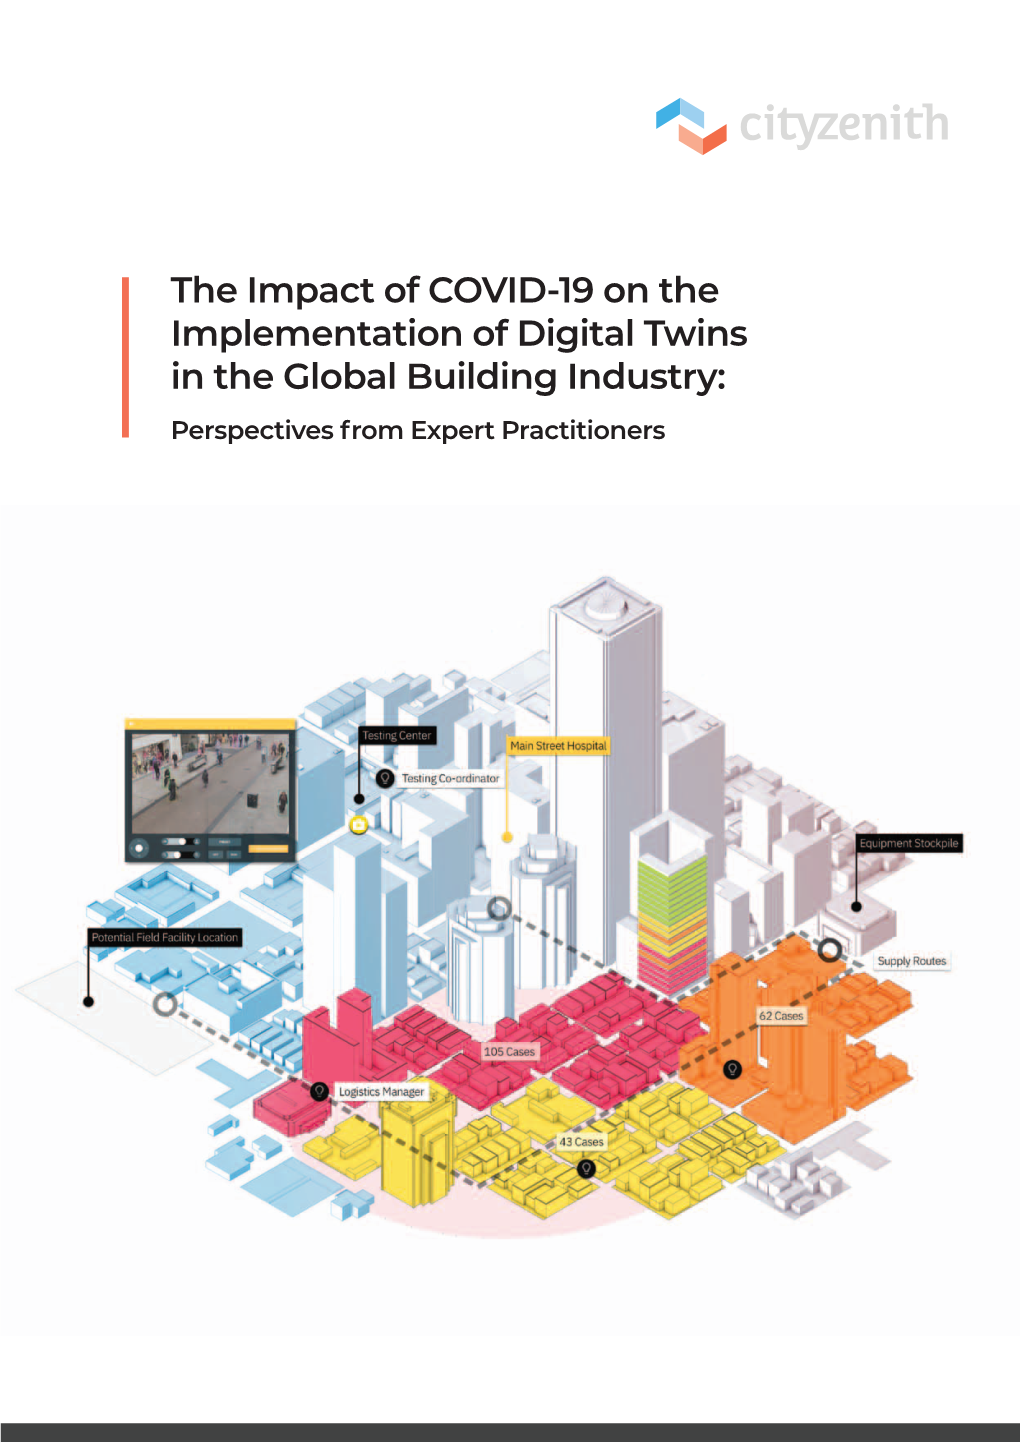 The Impact of COVID-19 on the Implementation of Digital Twins in the Global Building Industry: Perspectives from Expert Practitioners Contents